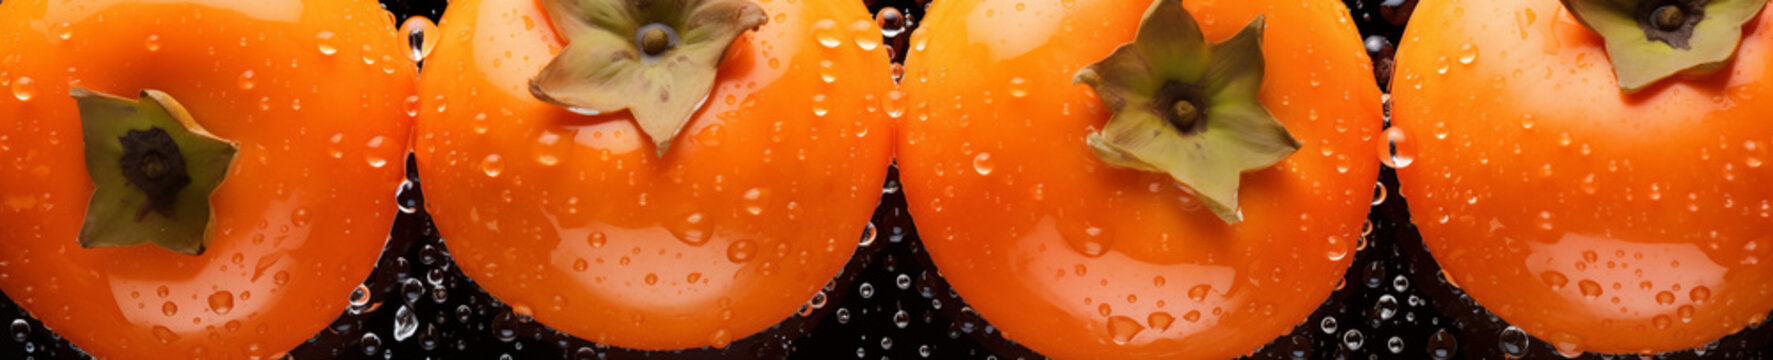 An Overhead Photo of Fresh Persimmons Covered in Water Drops